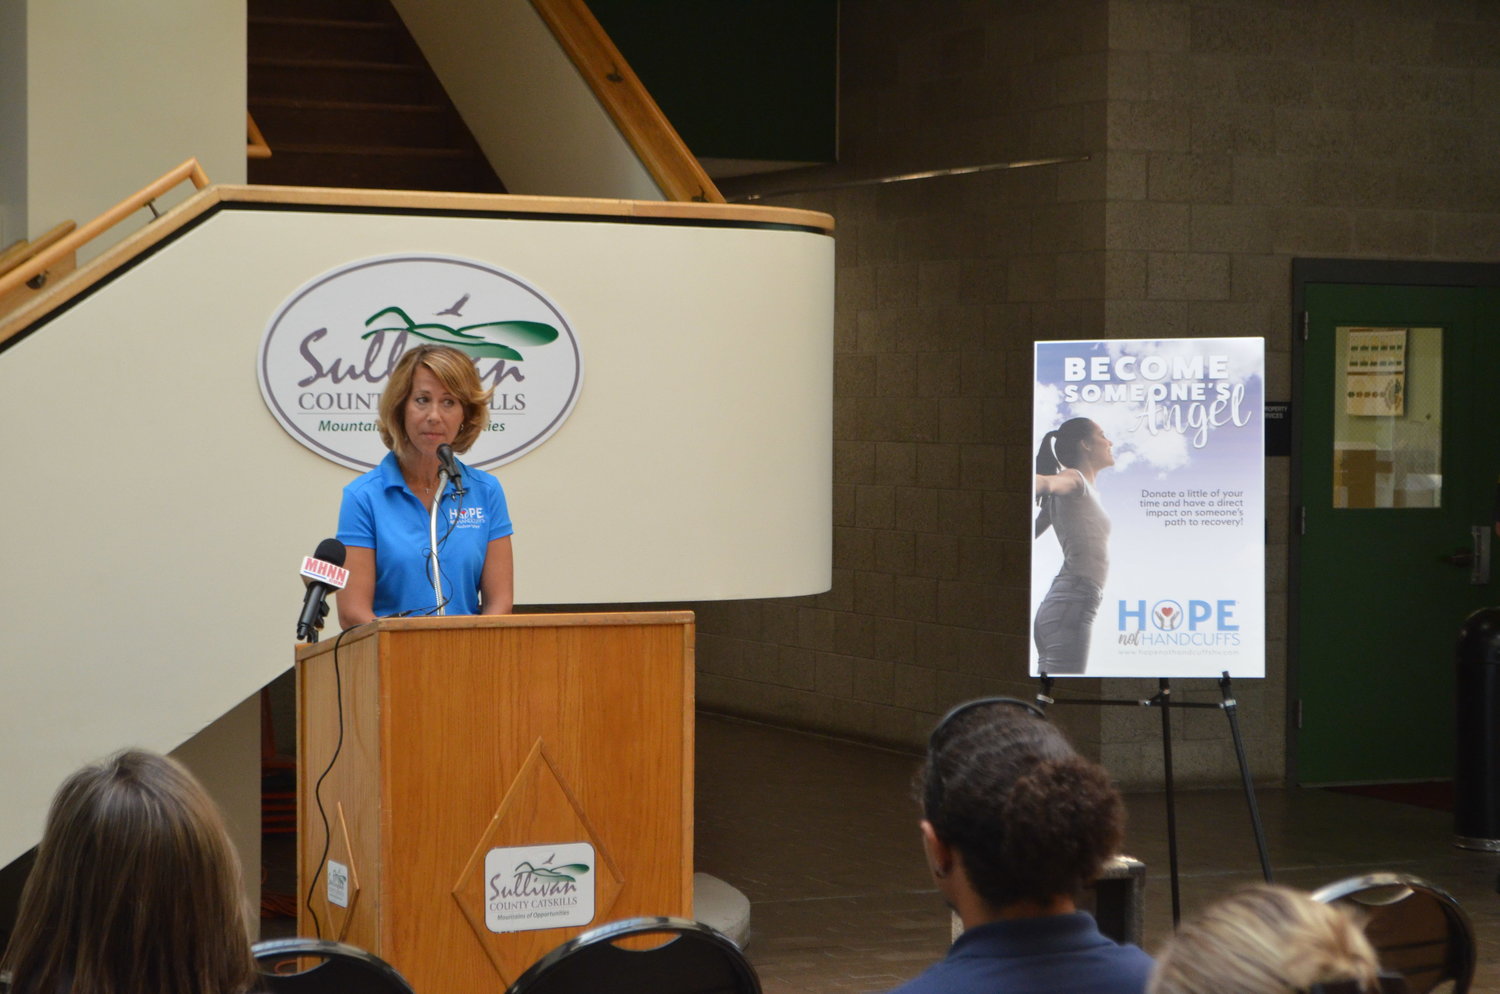 Hope Not Handcuffs Program Director Annette Kahrs talks about the important role volunteer "angels" play in connecting people suffering from addiction with treatment.